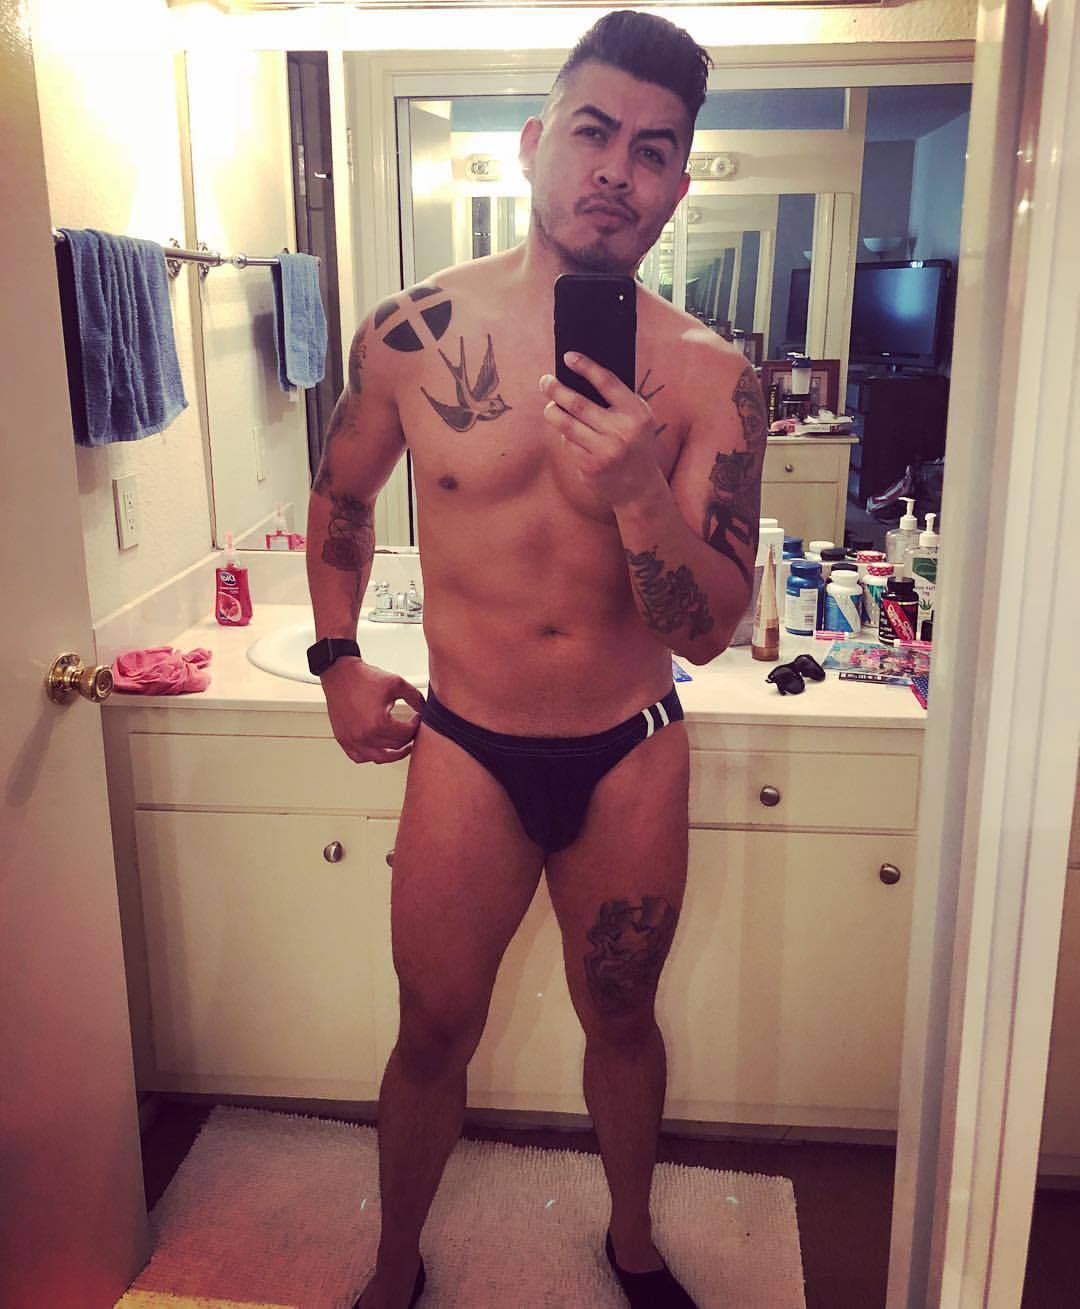 Looking good and feeling fine. Now it’s time to add more muscle. #bodypositive #hardworkpaysoffs #39yrsyoung #single #sorryfamilia #gaystagram #summerbodygoals